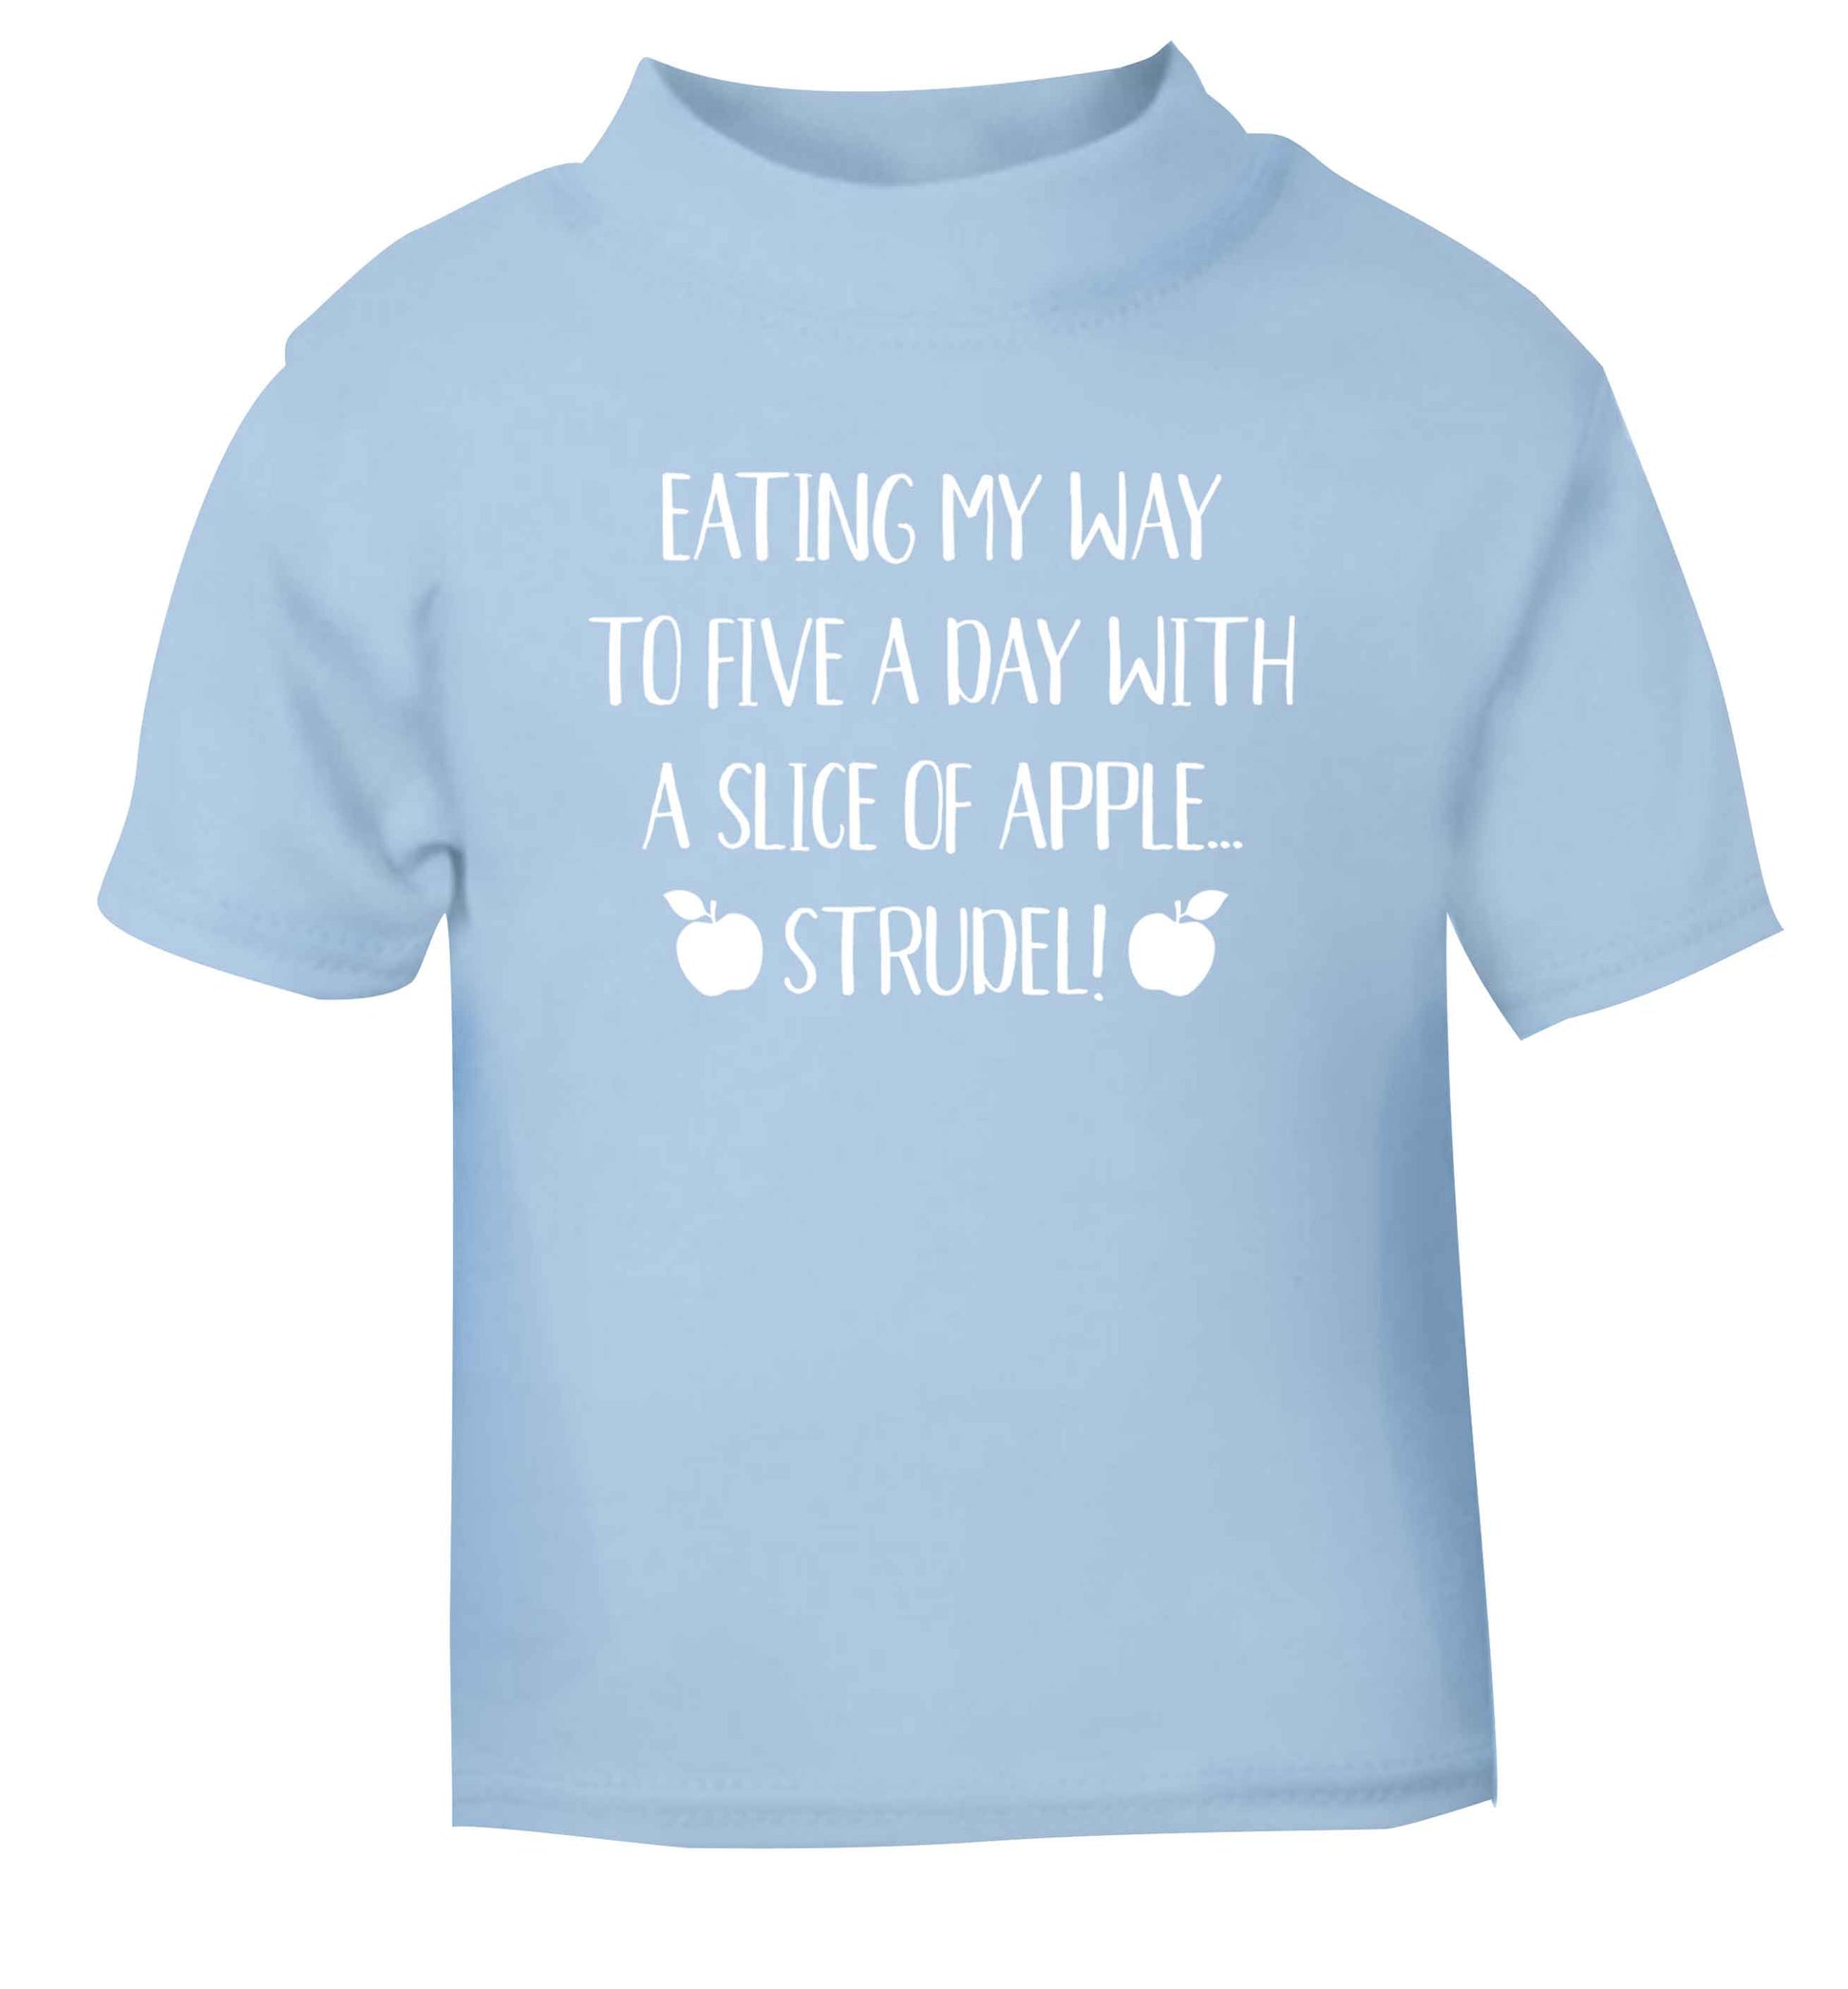 Eating my way to five a day with a slice of apple strudel light blue Baby Toddler Tshirt 2 Years